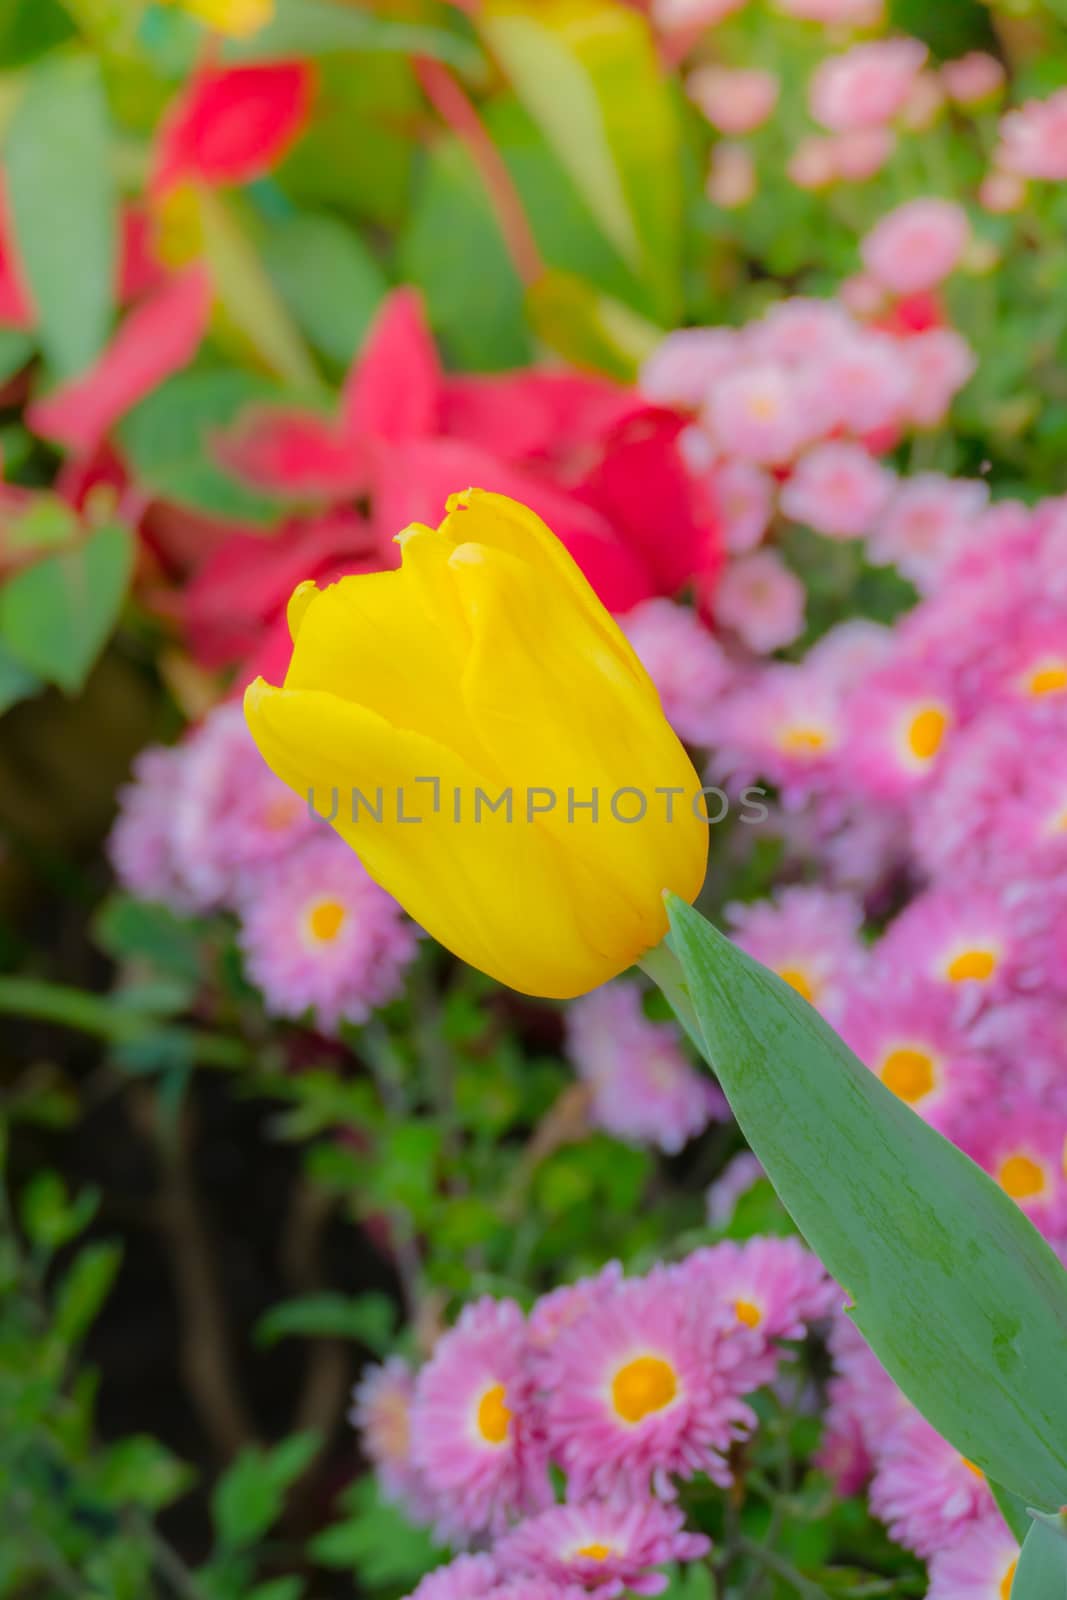 Tulip. Beautiful bouquet of tulips. colorful tulips. tulips in spring,colourful tulip